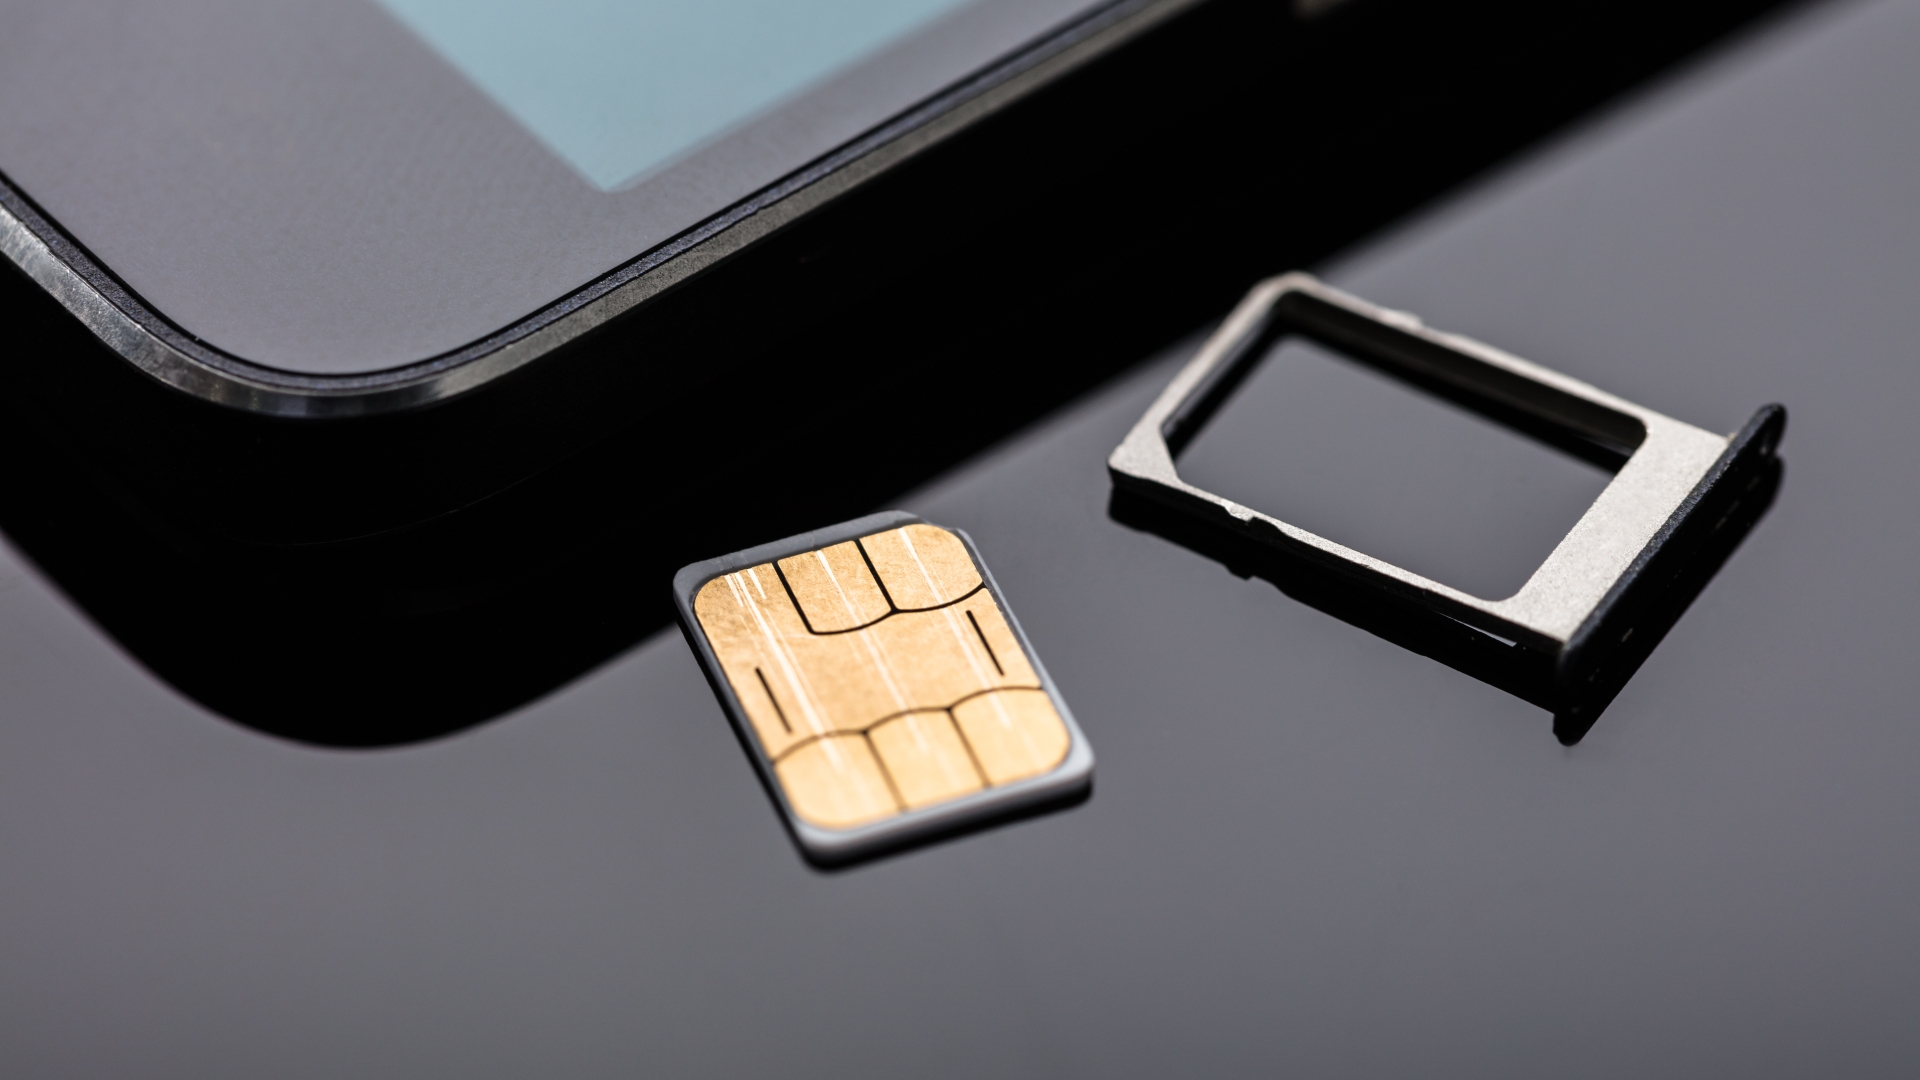 The Best Three SIM-Only Deals for June 2022